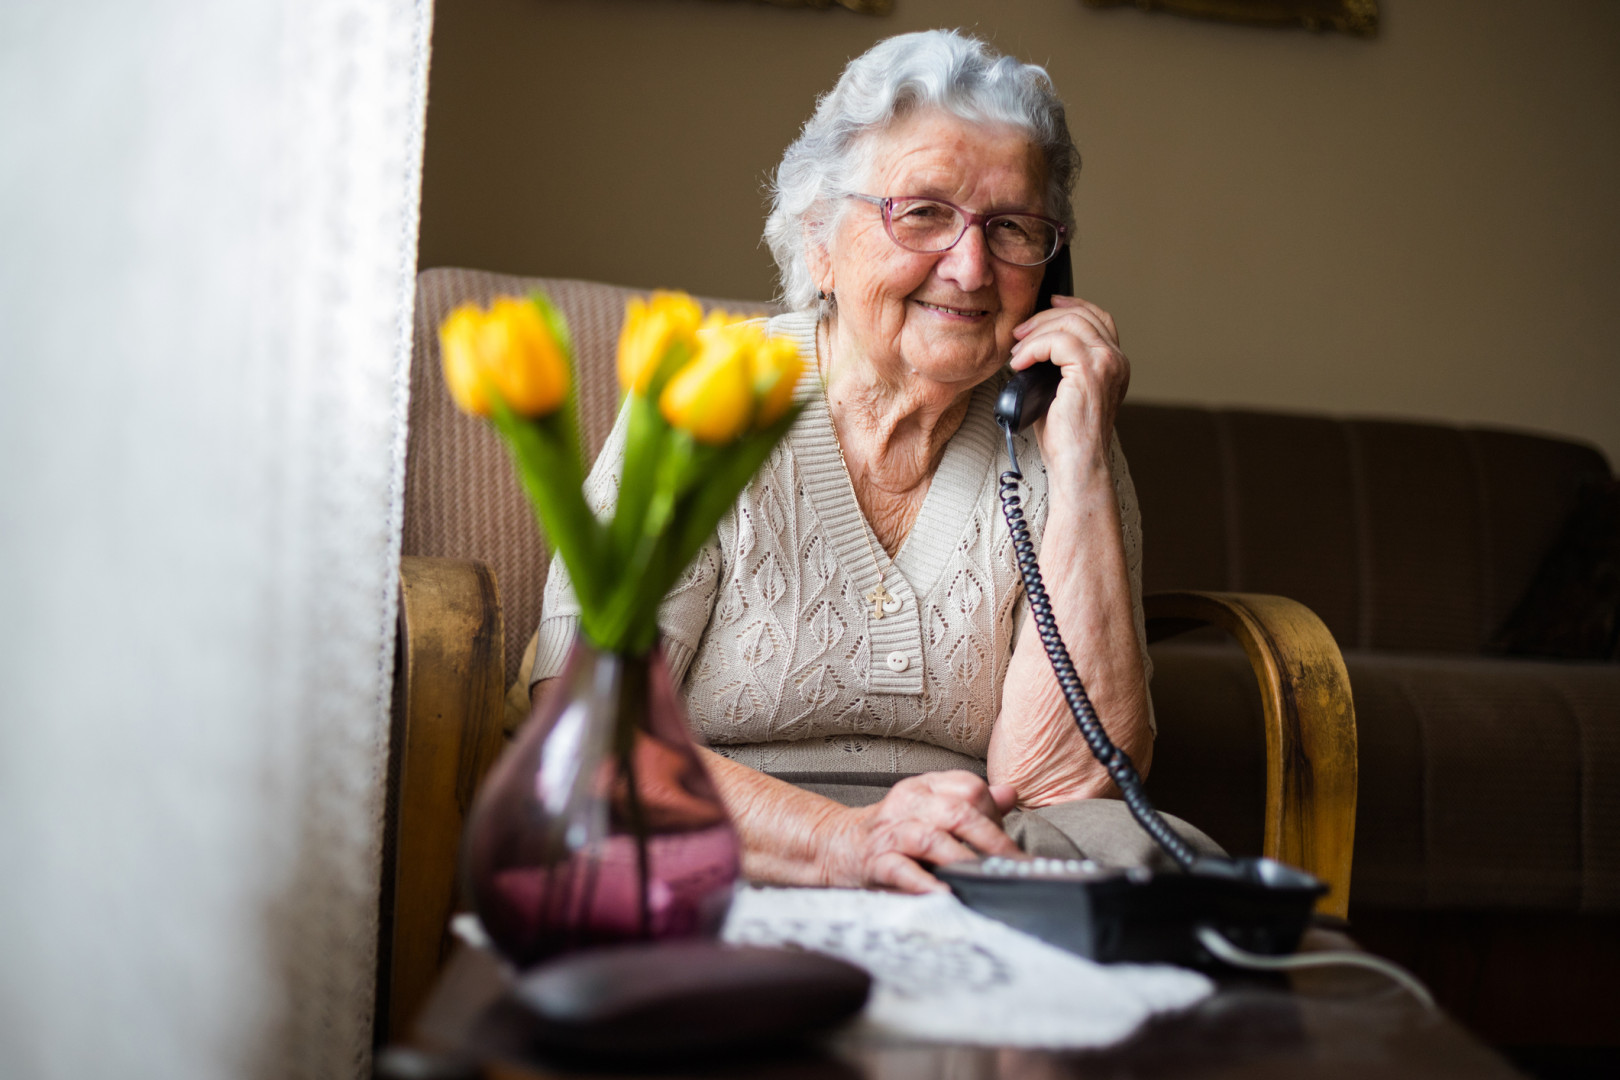 Elderly lady smiling whilst talking on the phone sitting on a chair in her living room.